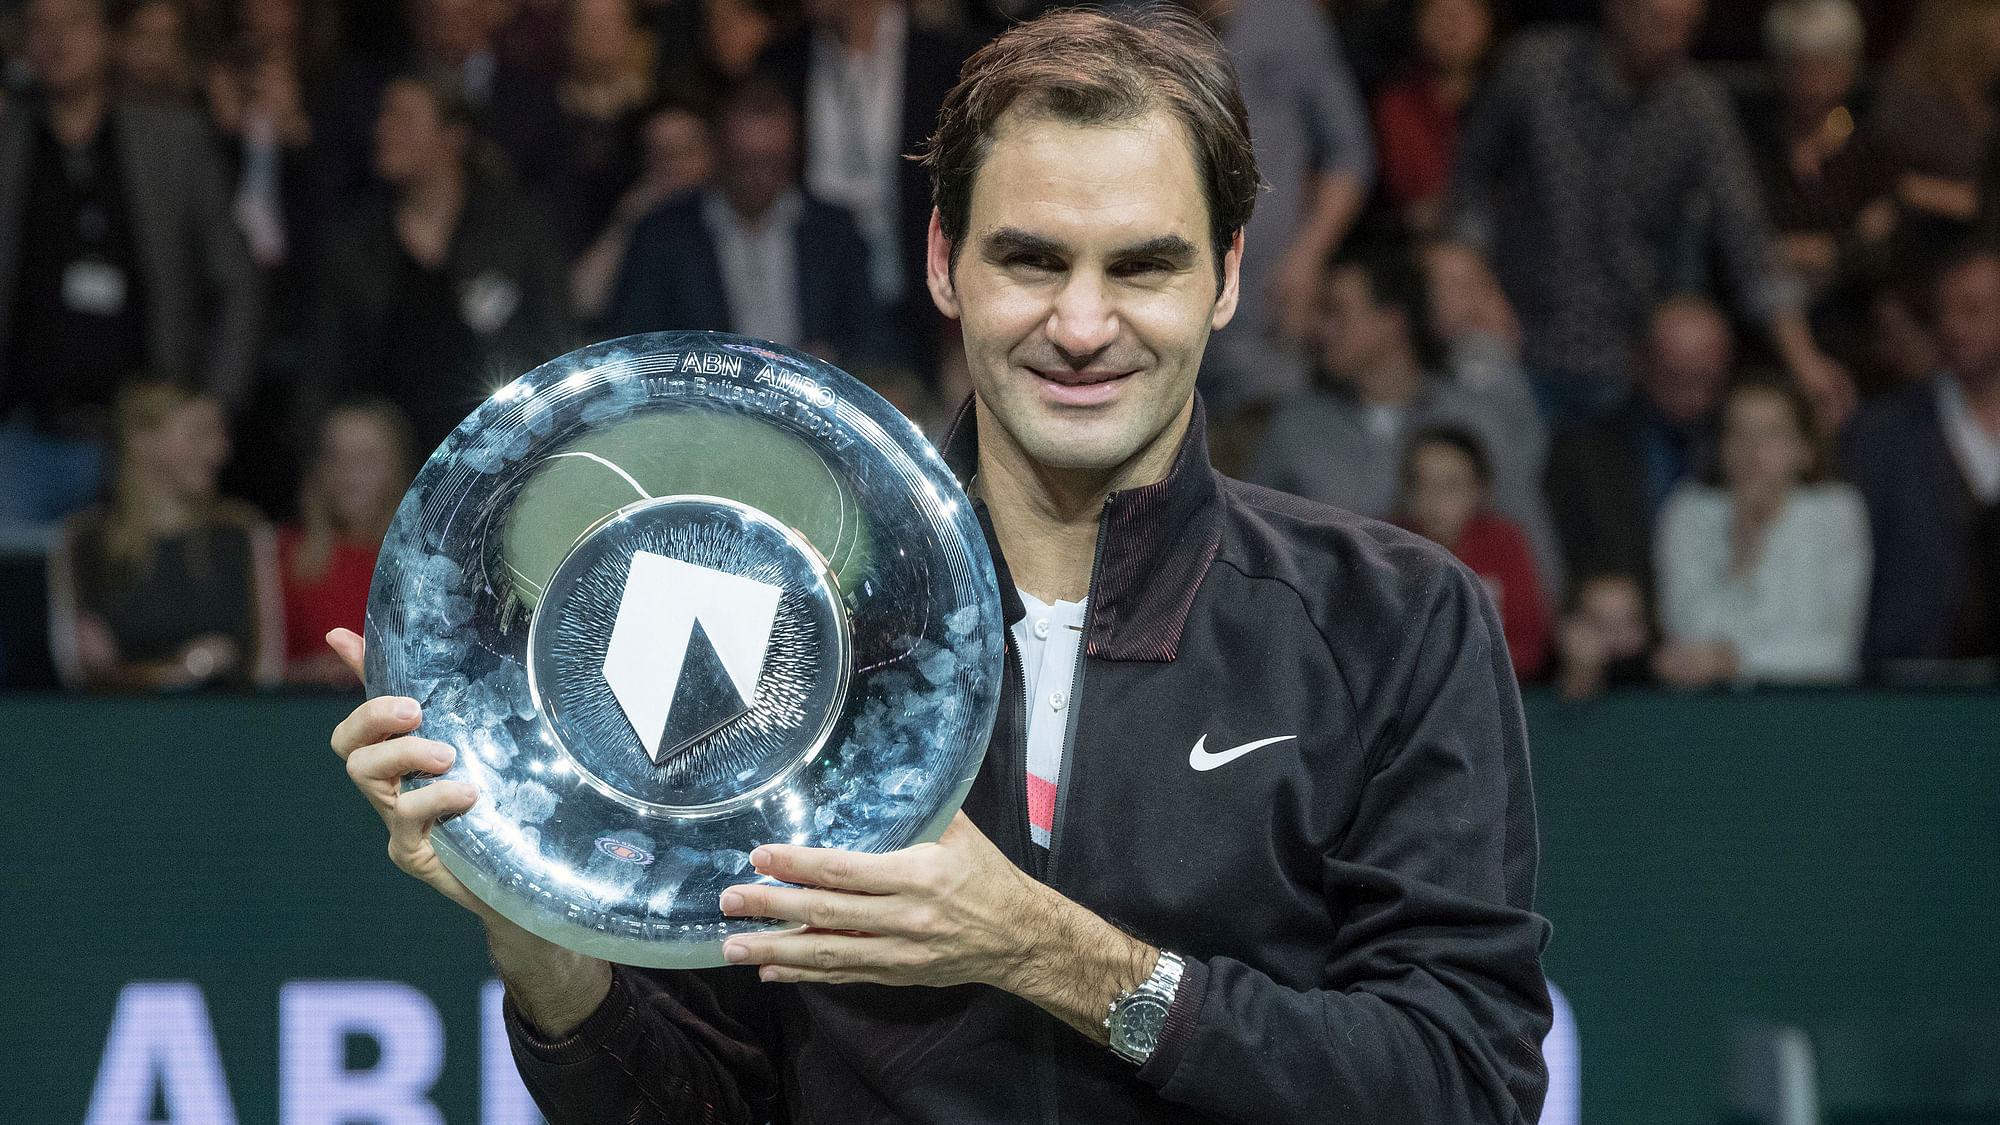 Roger Federer  holds the trophy after winning his match against Bulgaria’s Grigor Dimitrov in two sets, 6-2, 6-2, in the men’s singles final of the ABN AMRO tournament